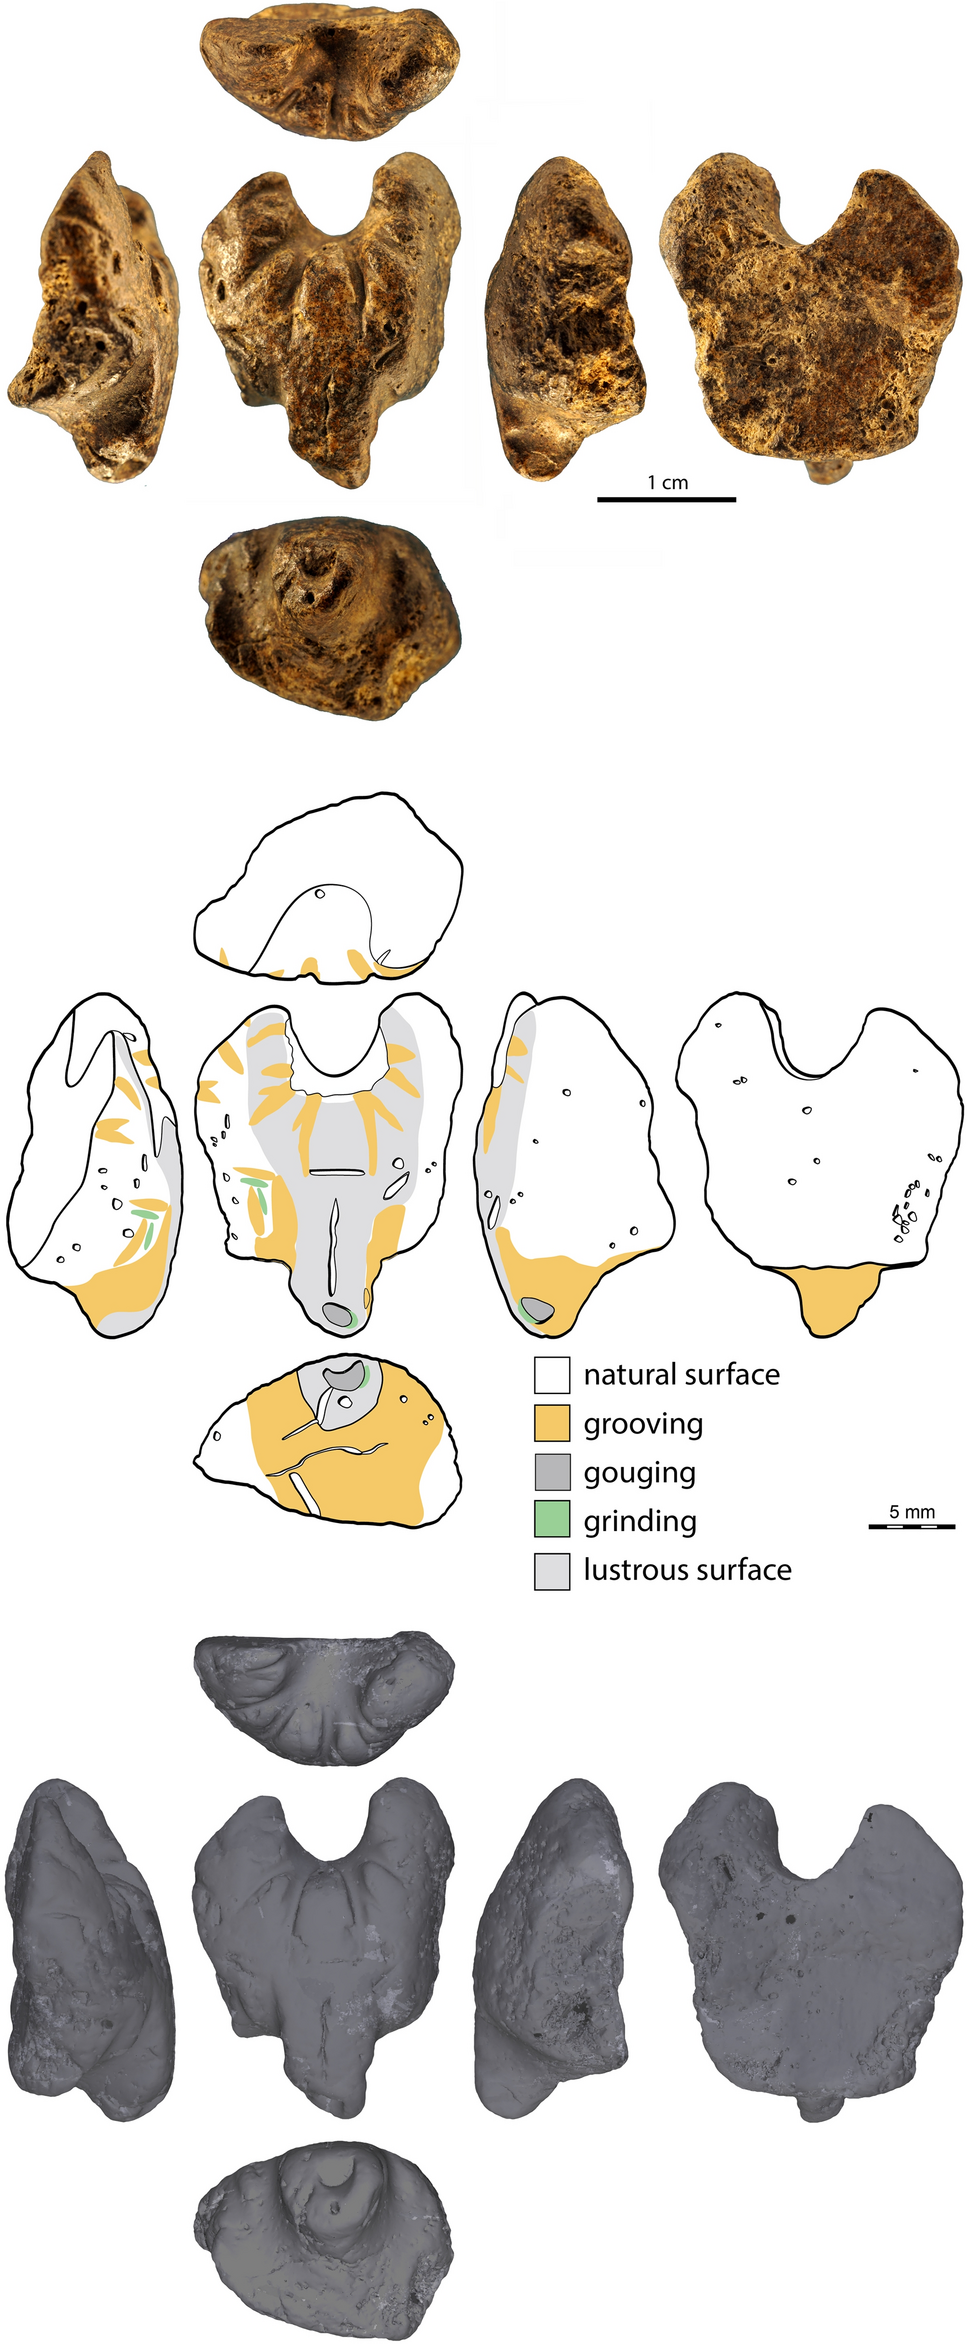 A 36,200-year-old carving from Grotte des Gorges, Amange, Jura, France |  Scientific Reports